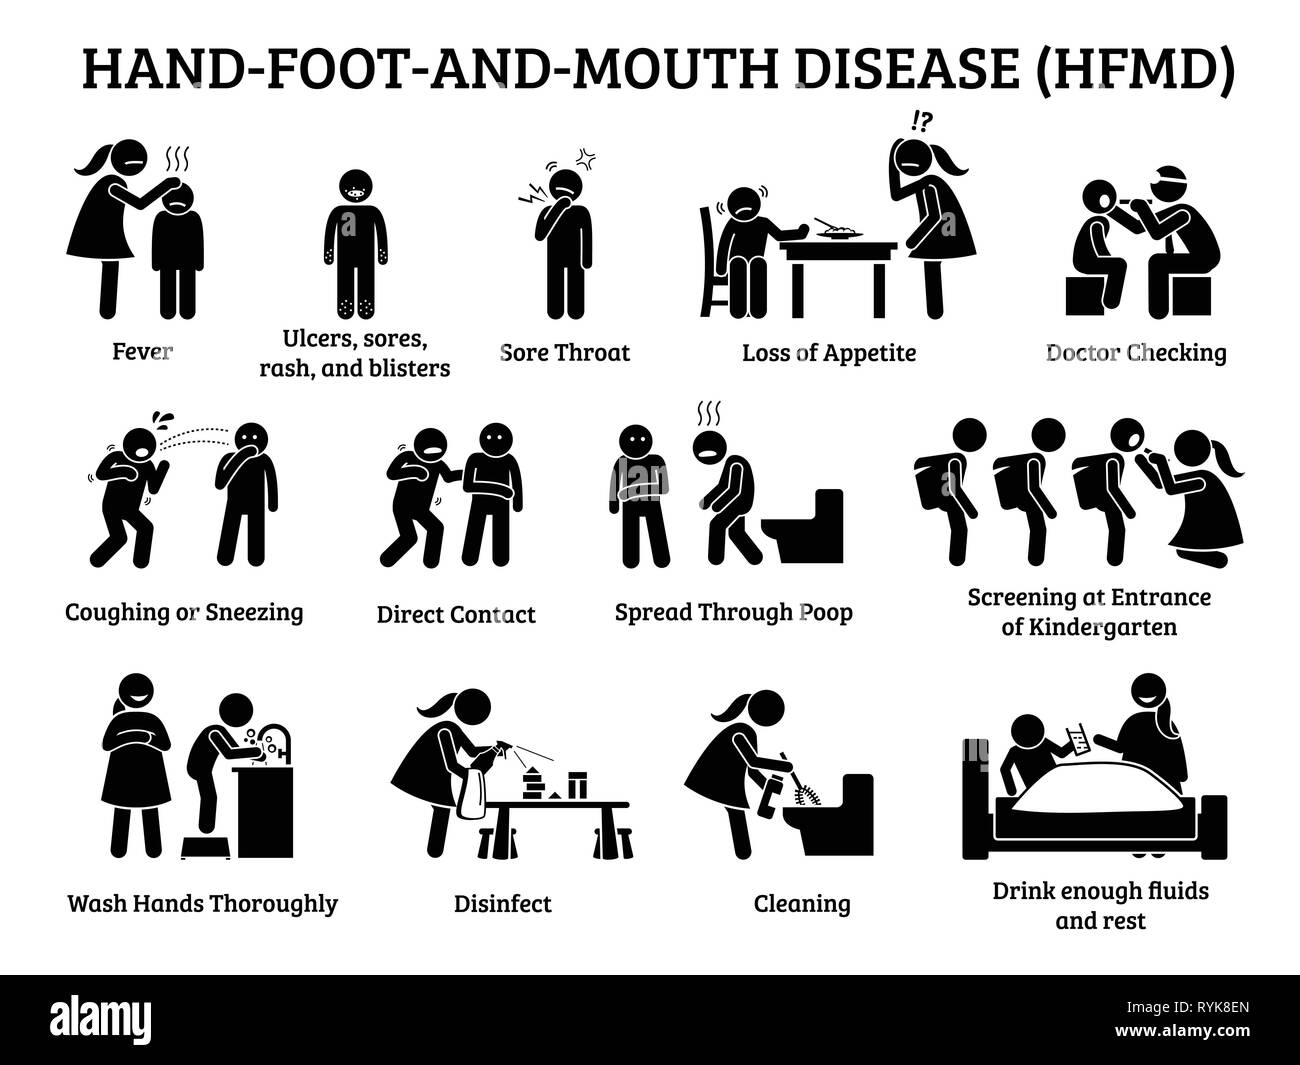 Hand foot and mouth disease HFMD icons. Illustrations depict signs, symptoms, prevention, and actions on HFMD viral infection for small children at pr Stock Vector